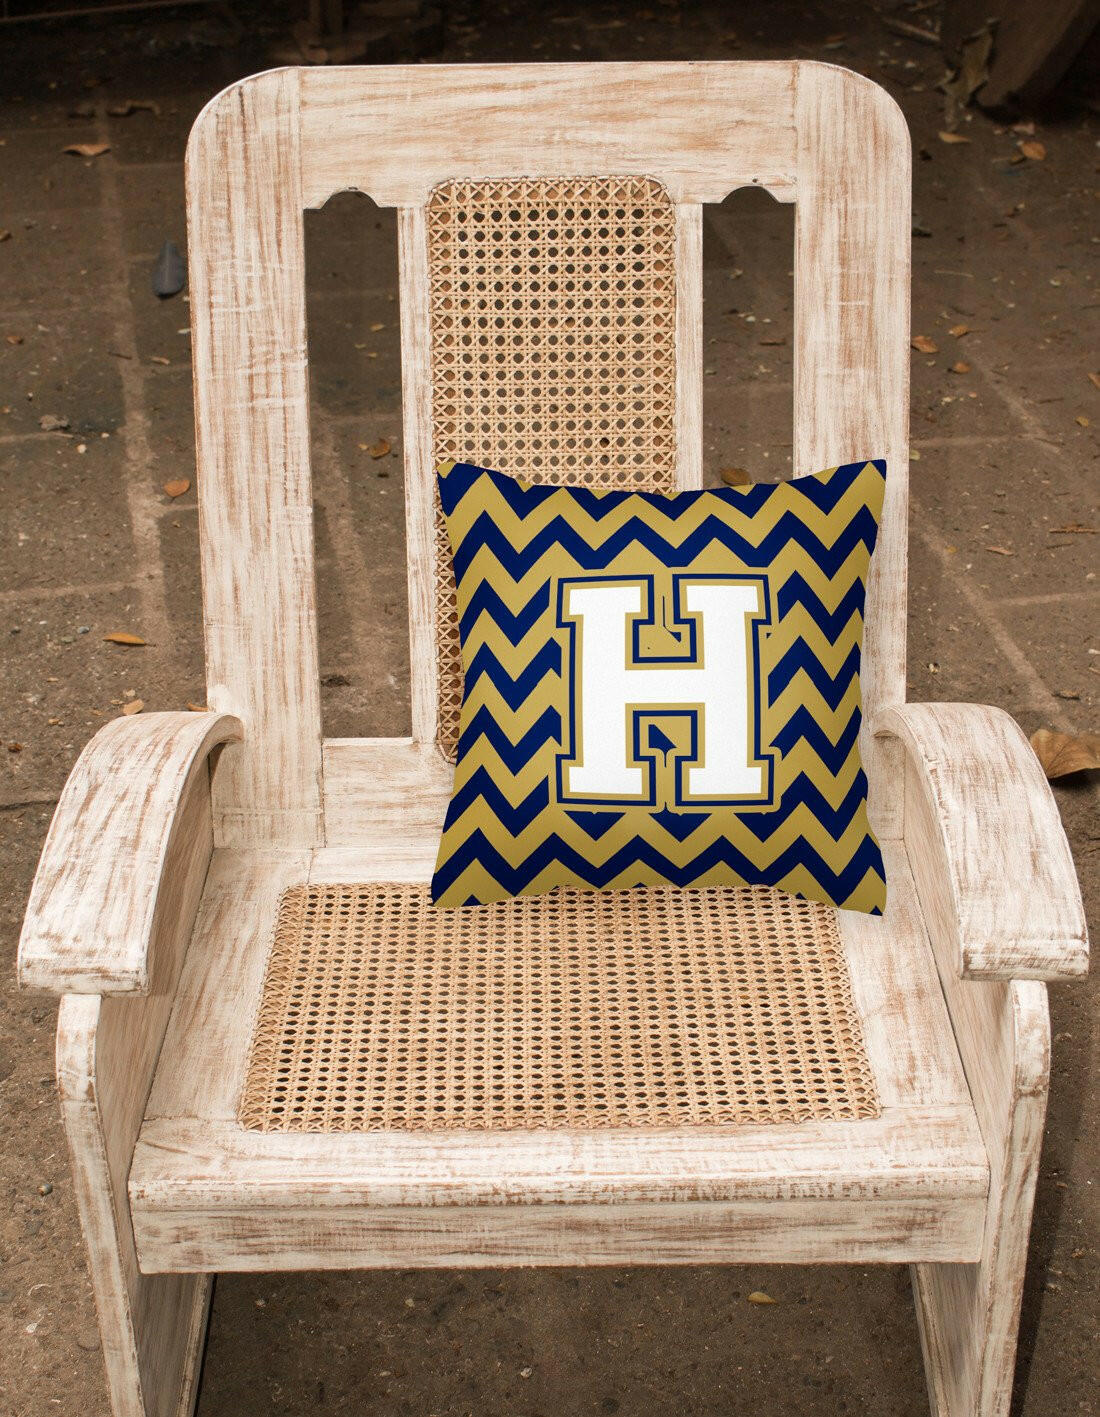 Letter H Chevron Navy Blue and Gold Fabric Decorative Pillow CJ1057-HPW1414 by Caroline's Treasures